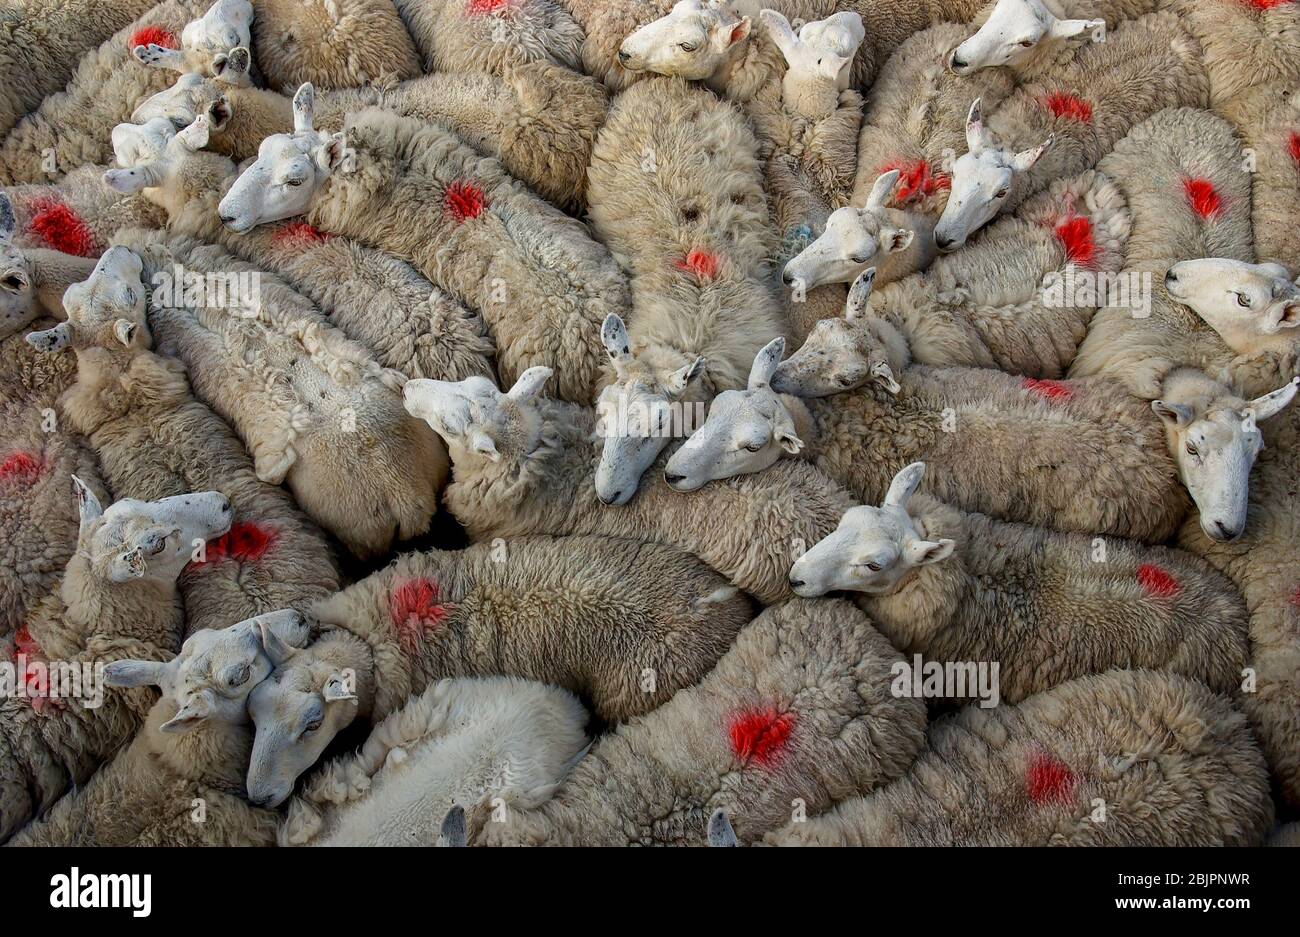 Sheep gathered in a pen waiting to be sheared, Isle of Eigg, Inner Hebrides,  Scotland. Stock Photo